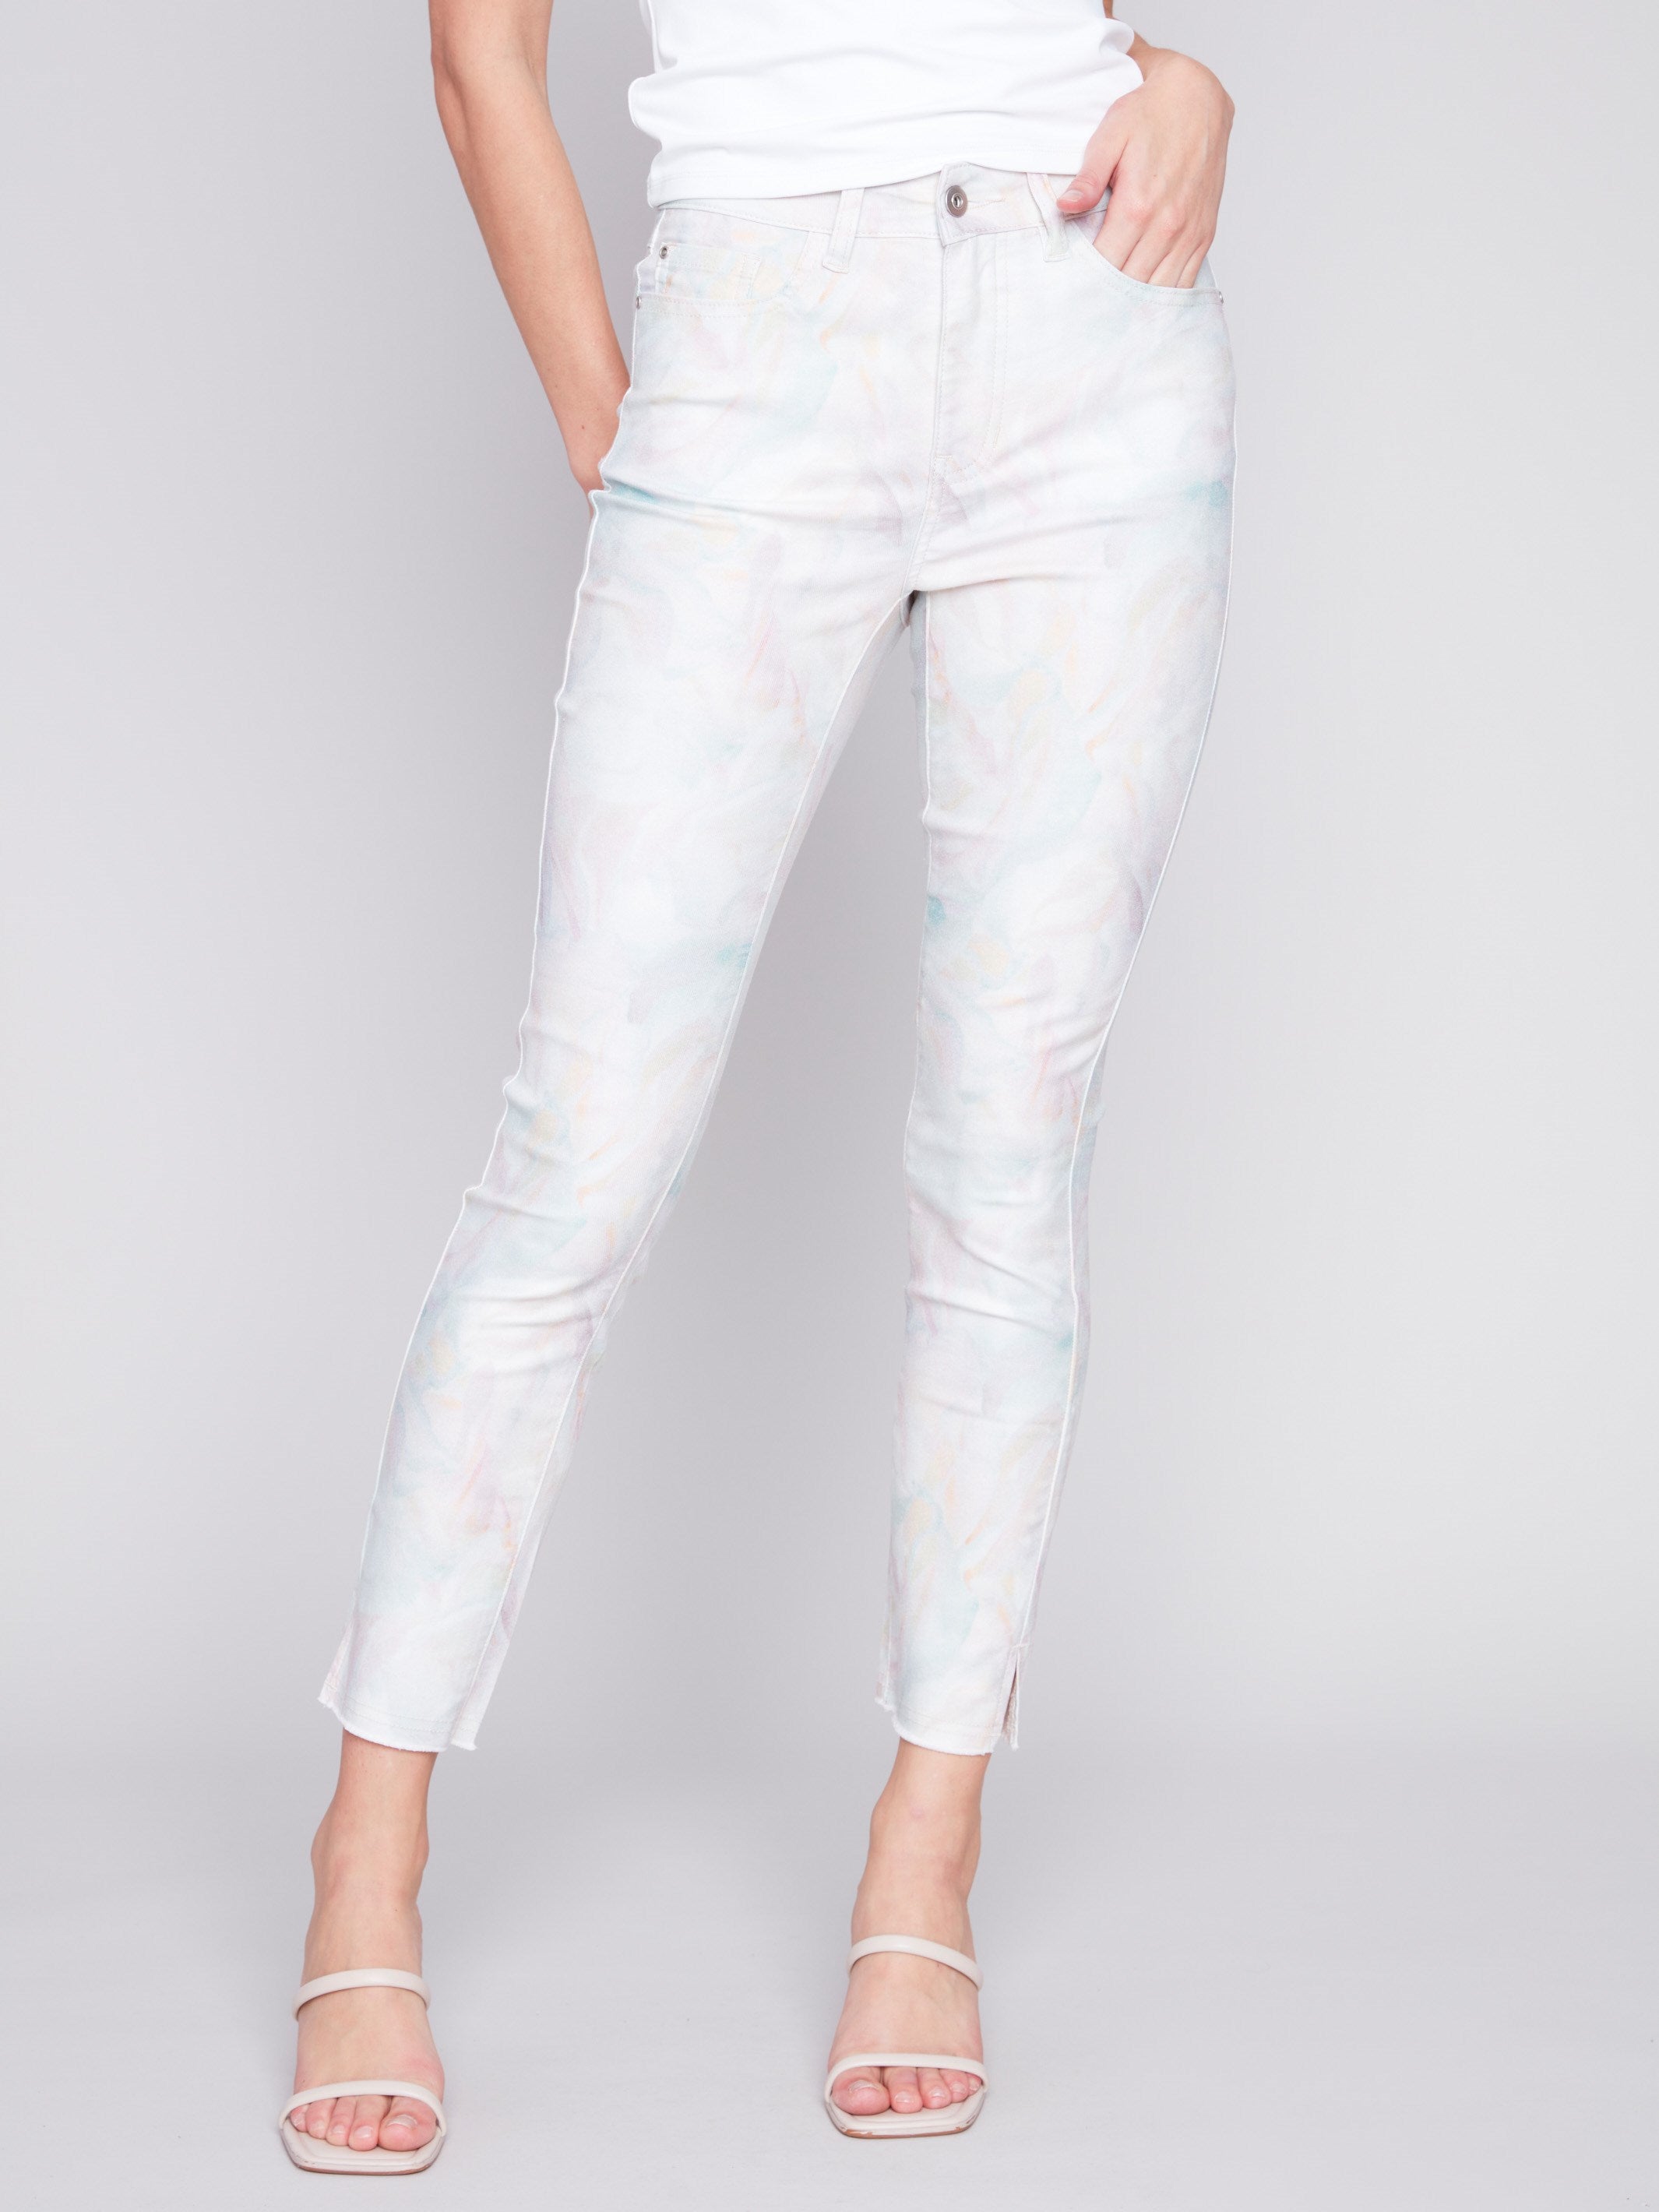 Printed Twill Pants with Hem Slit - Pastel - Charlie B Collection Canada - Image 2